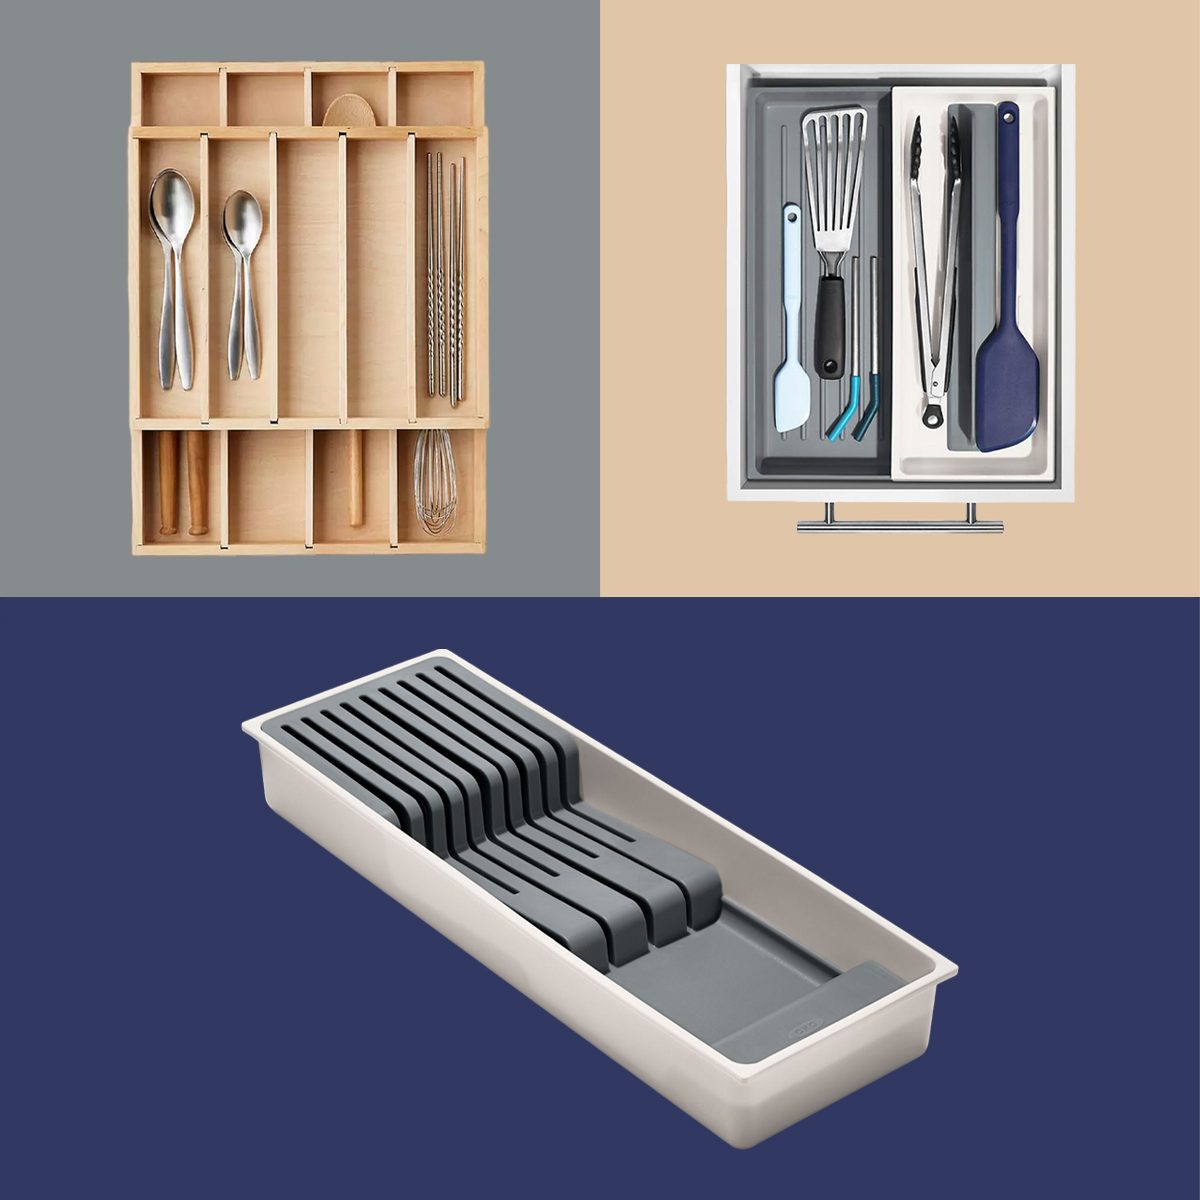 15 Kitchen drawer organizers – for a clean and clutter-free décor